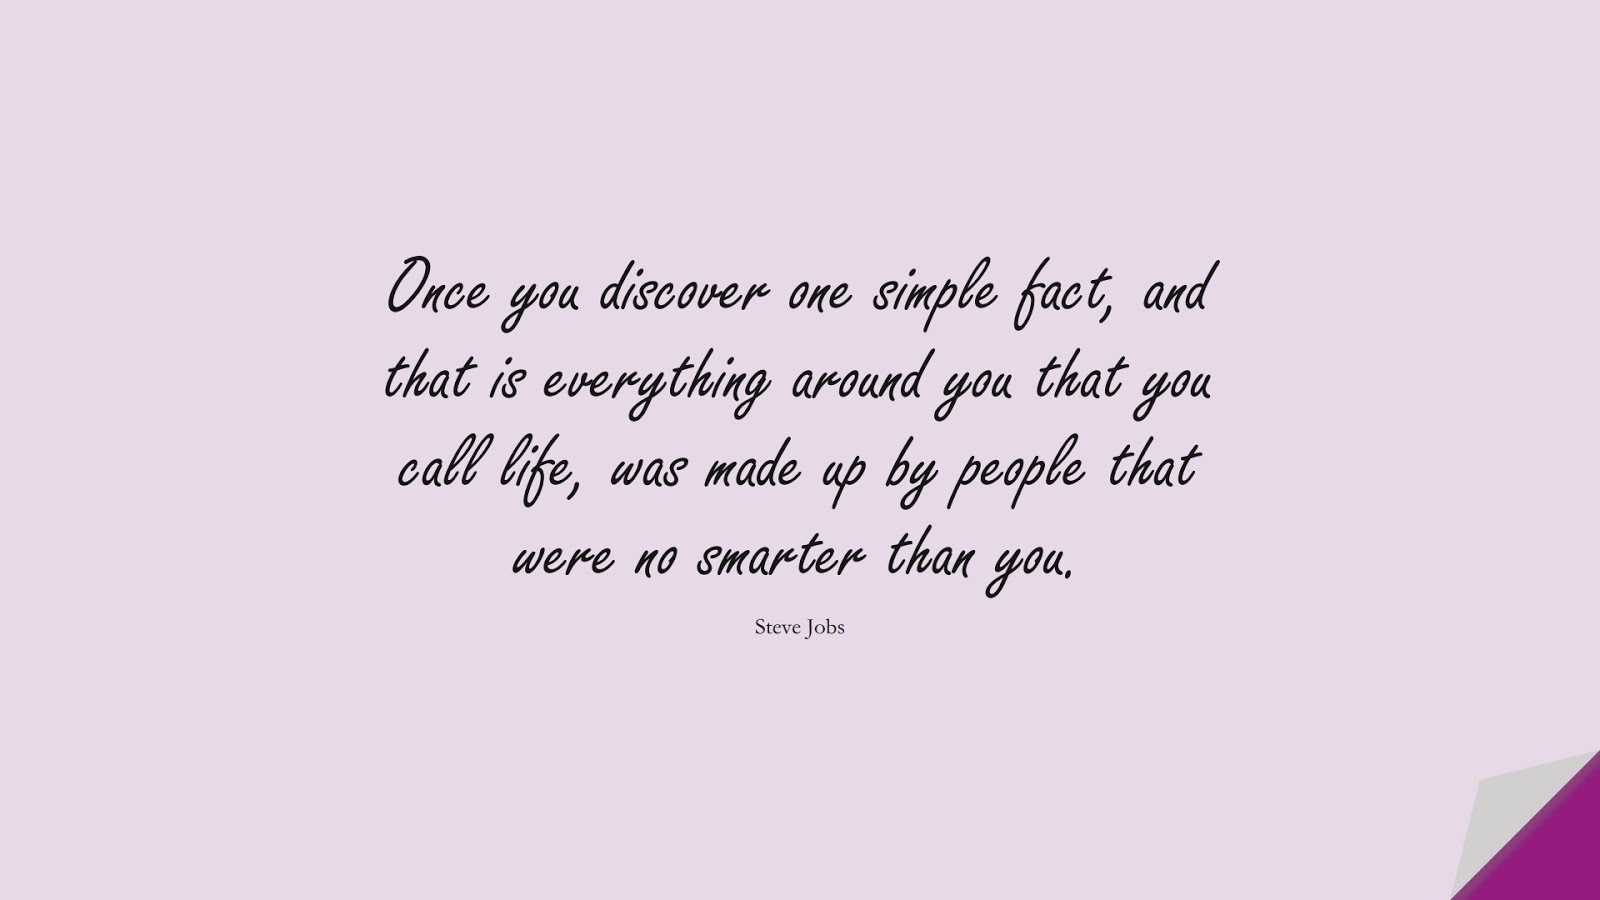 Once you discover one simple fact, and that is everything around you that you call life, was made up by people that were no smarter than you. (Steve Jobs);  #SteveJobsQuotes